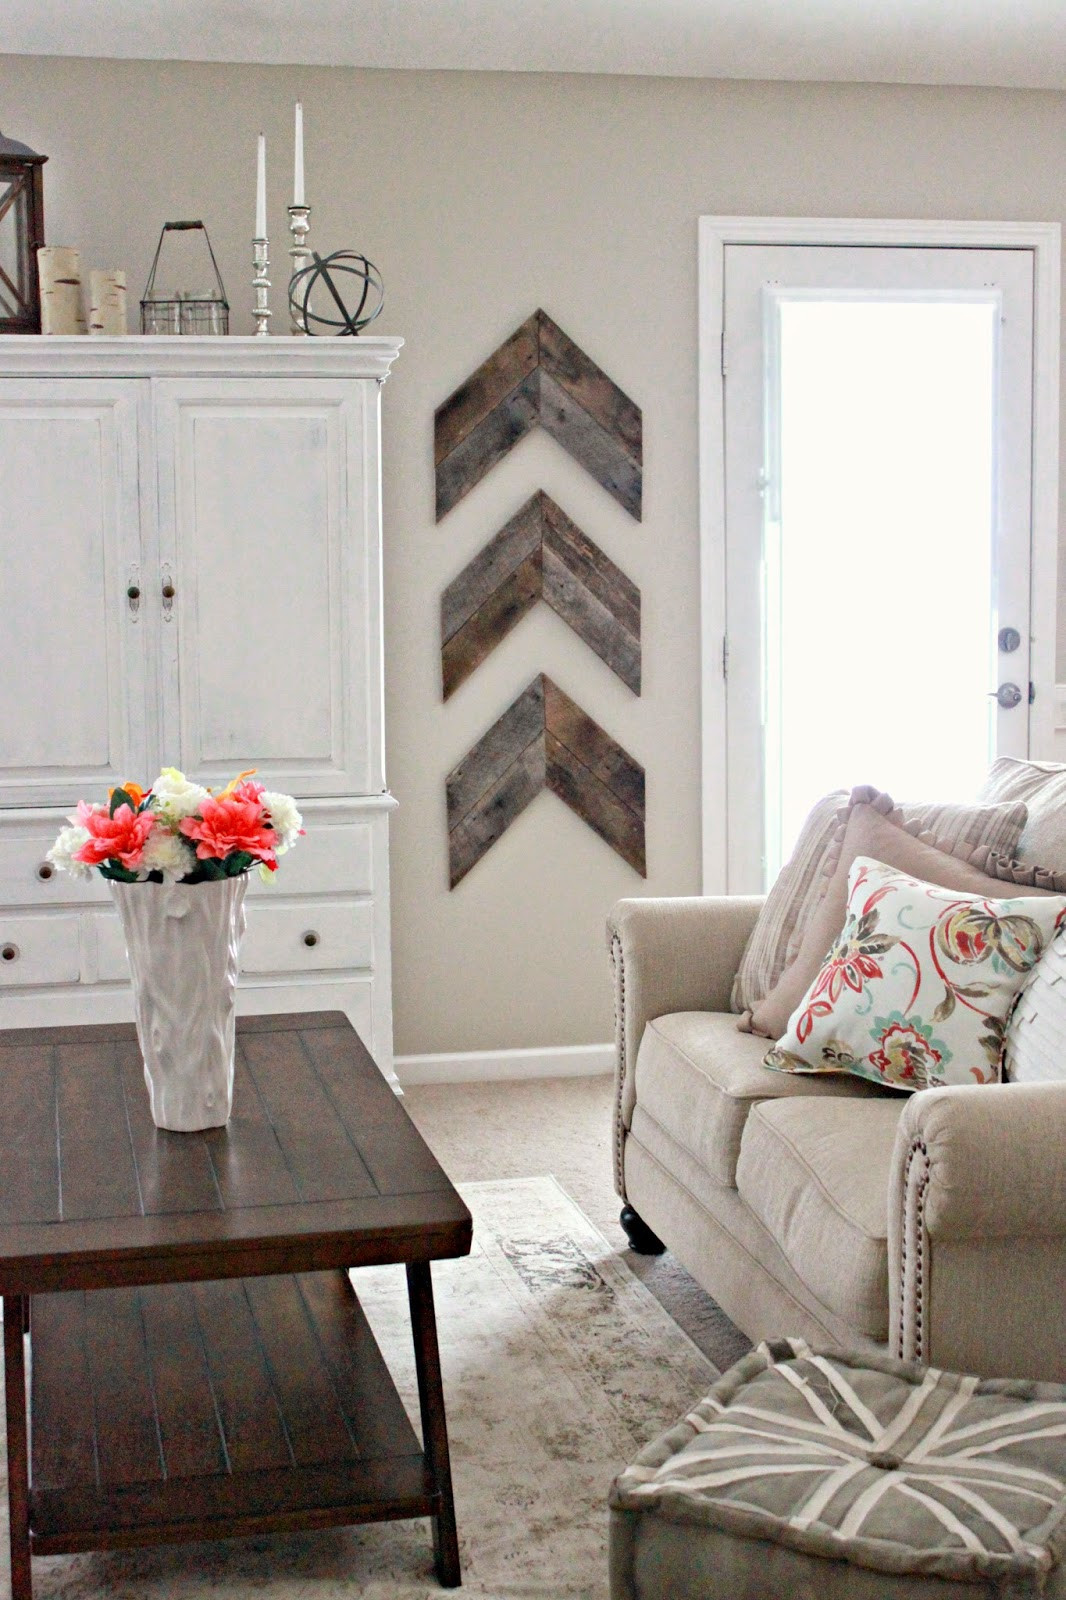 Paintings For Living Room Walls
 15 Striking Ways to Decorate with Arrows